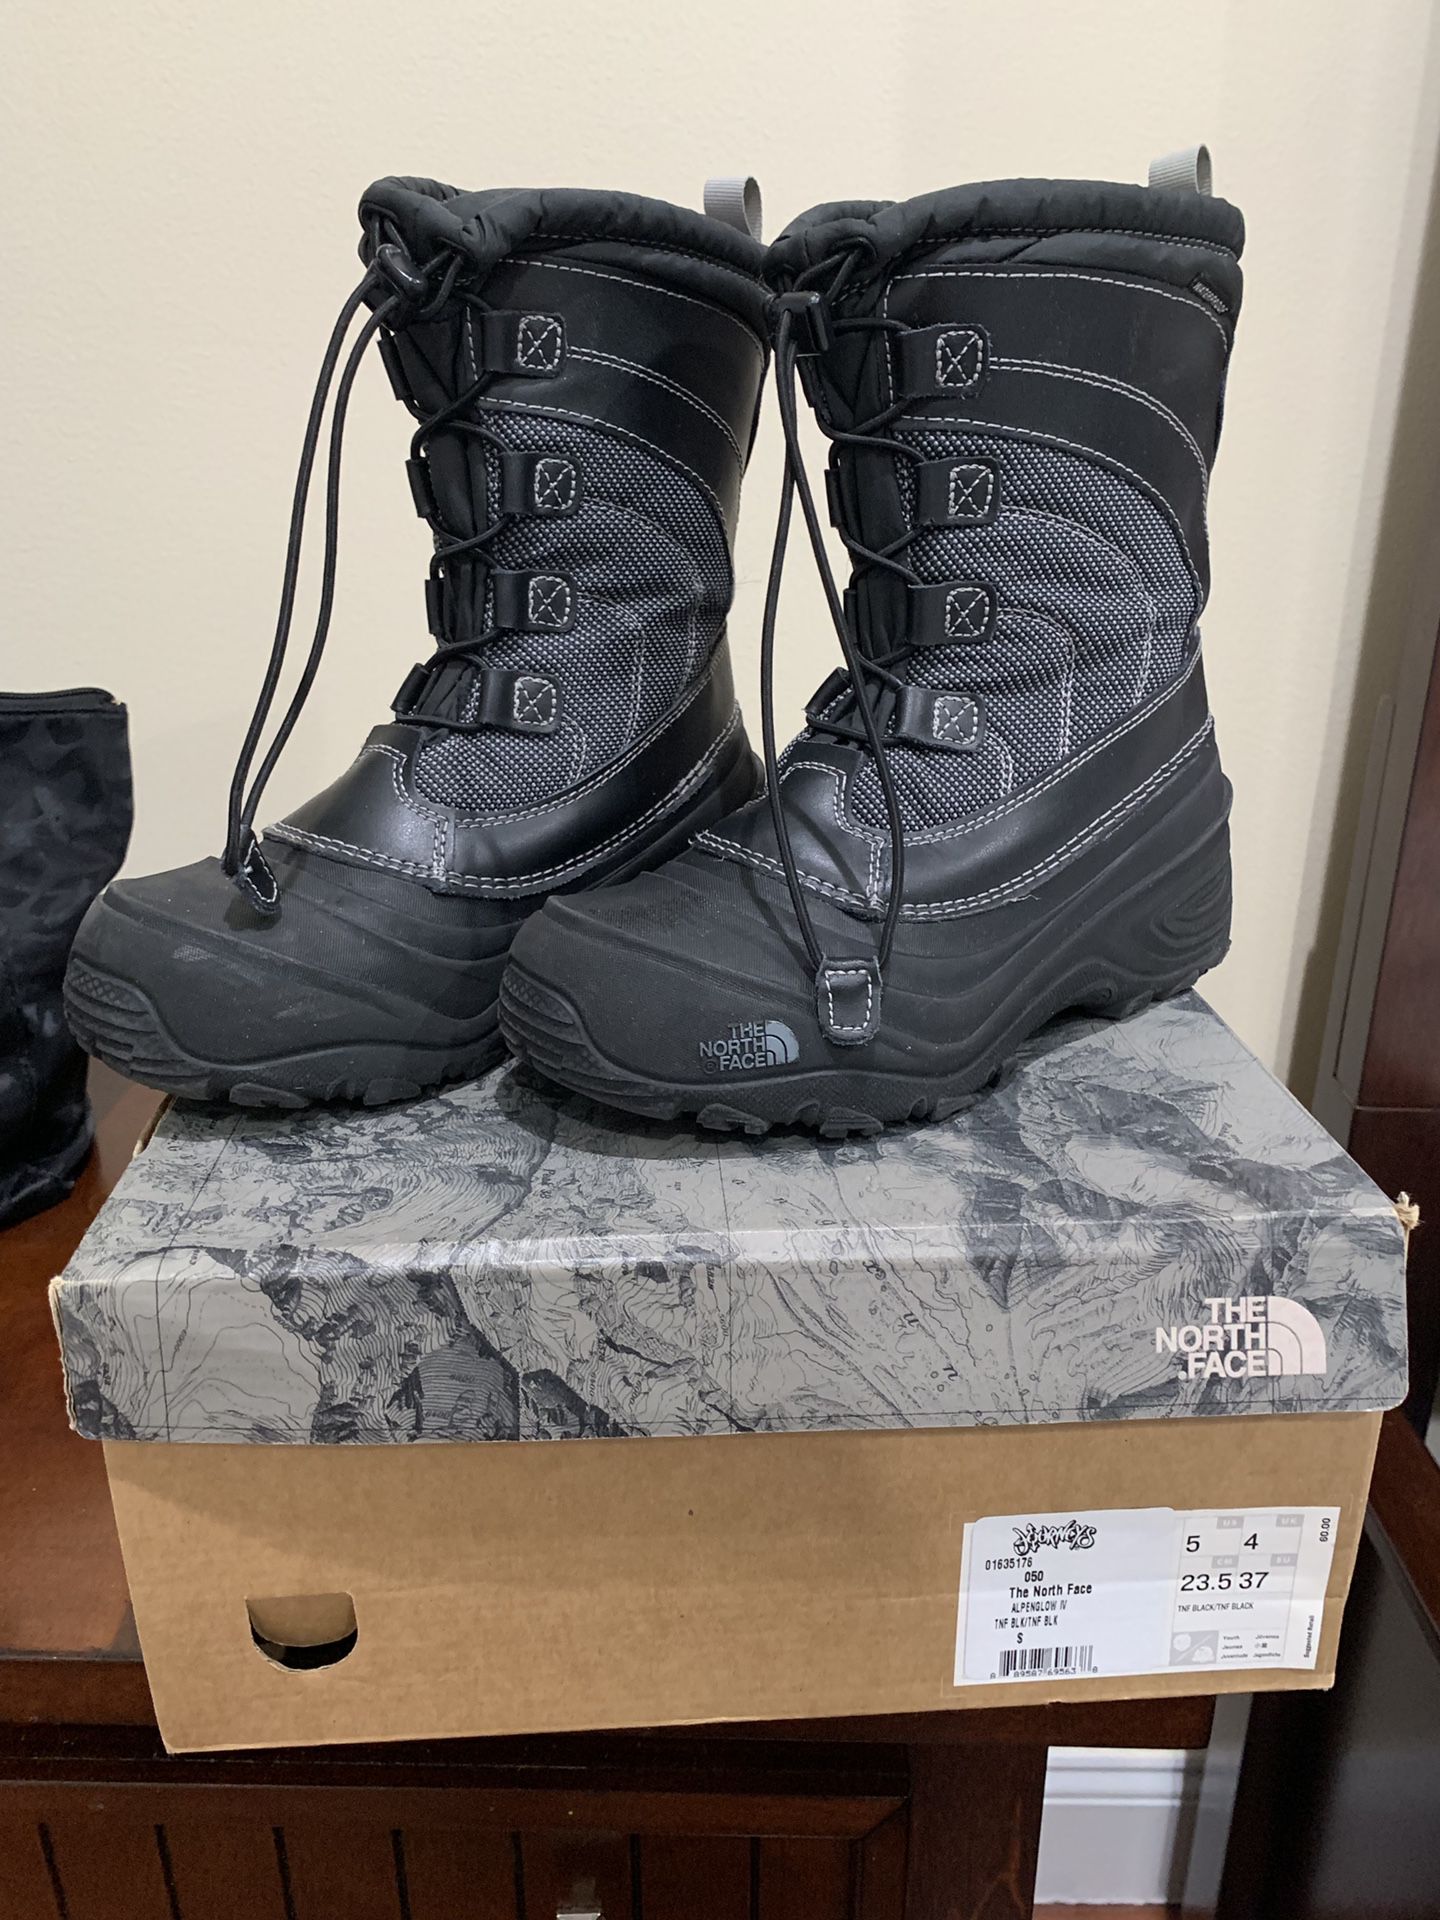 Kids North Face snow boots size 5 $25 serious buyers and pick up only, still in good condition, available for pick up asap